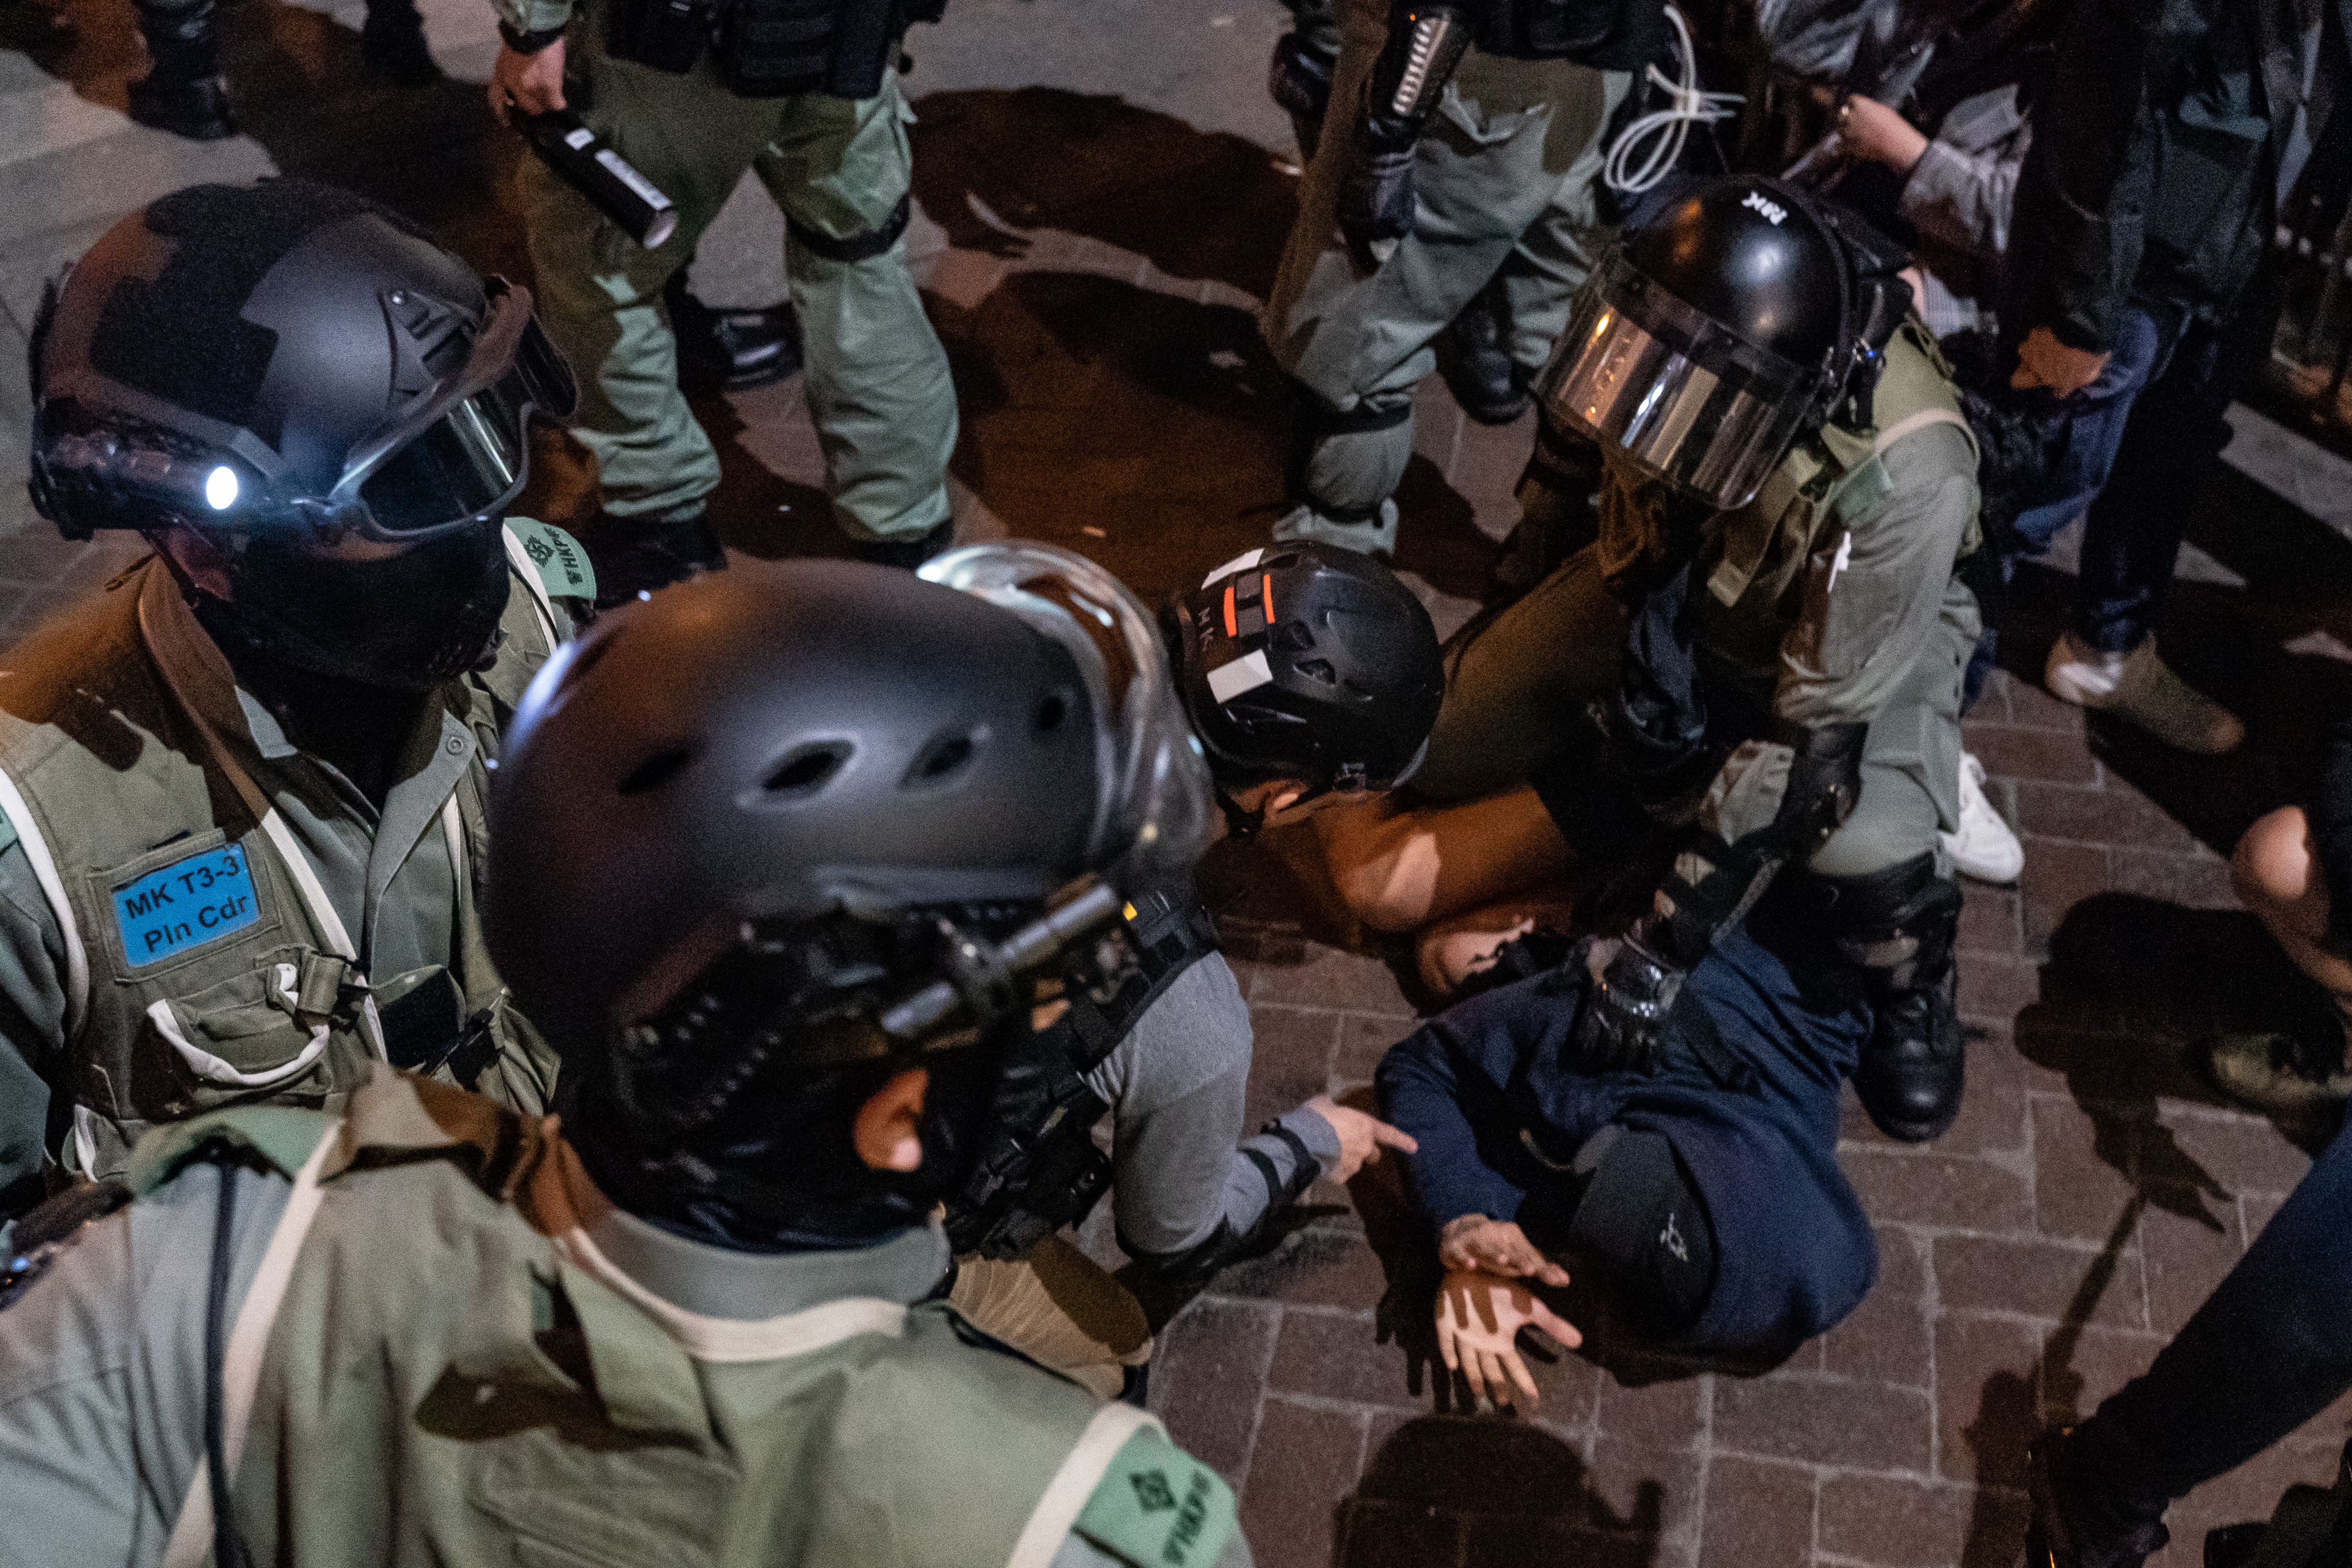 A man is detained by riot police outside of a police station at Mongkok district ahead of countdown on New Year's eve on December 31, 2019 in Hong Kong, China. (Anthony Kwan/Getty Images)